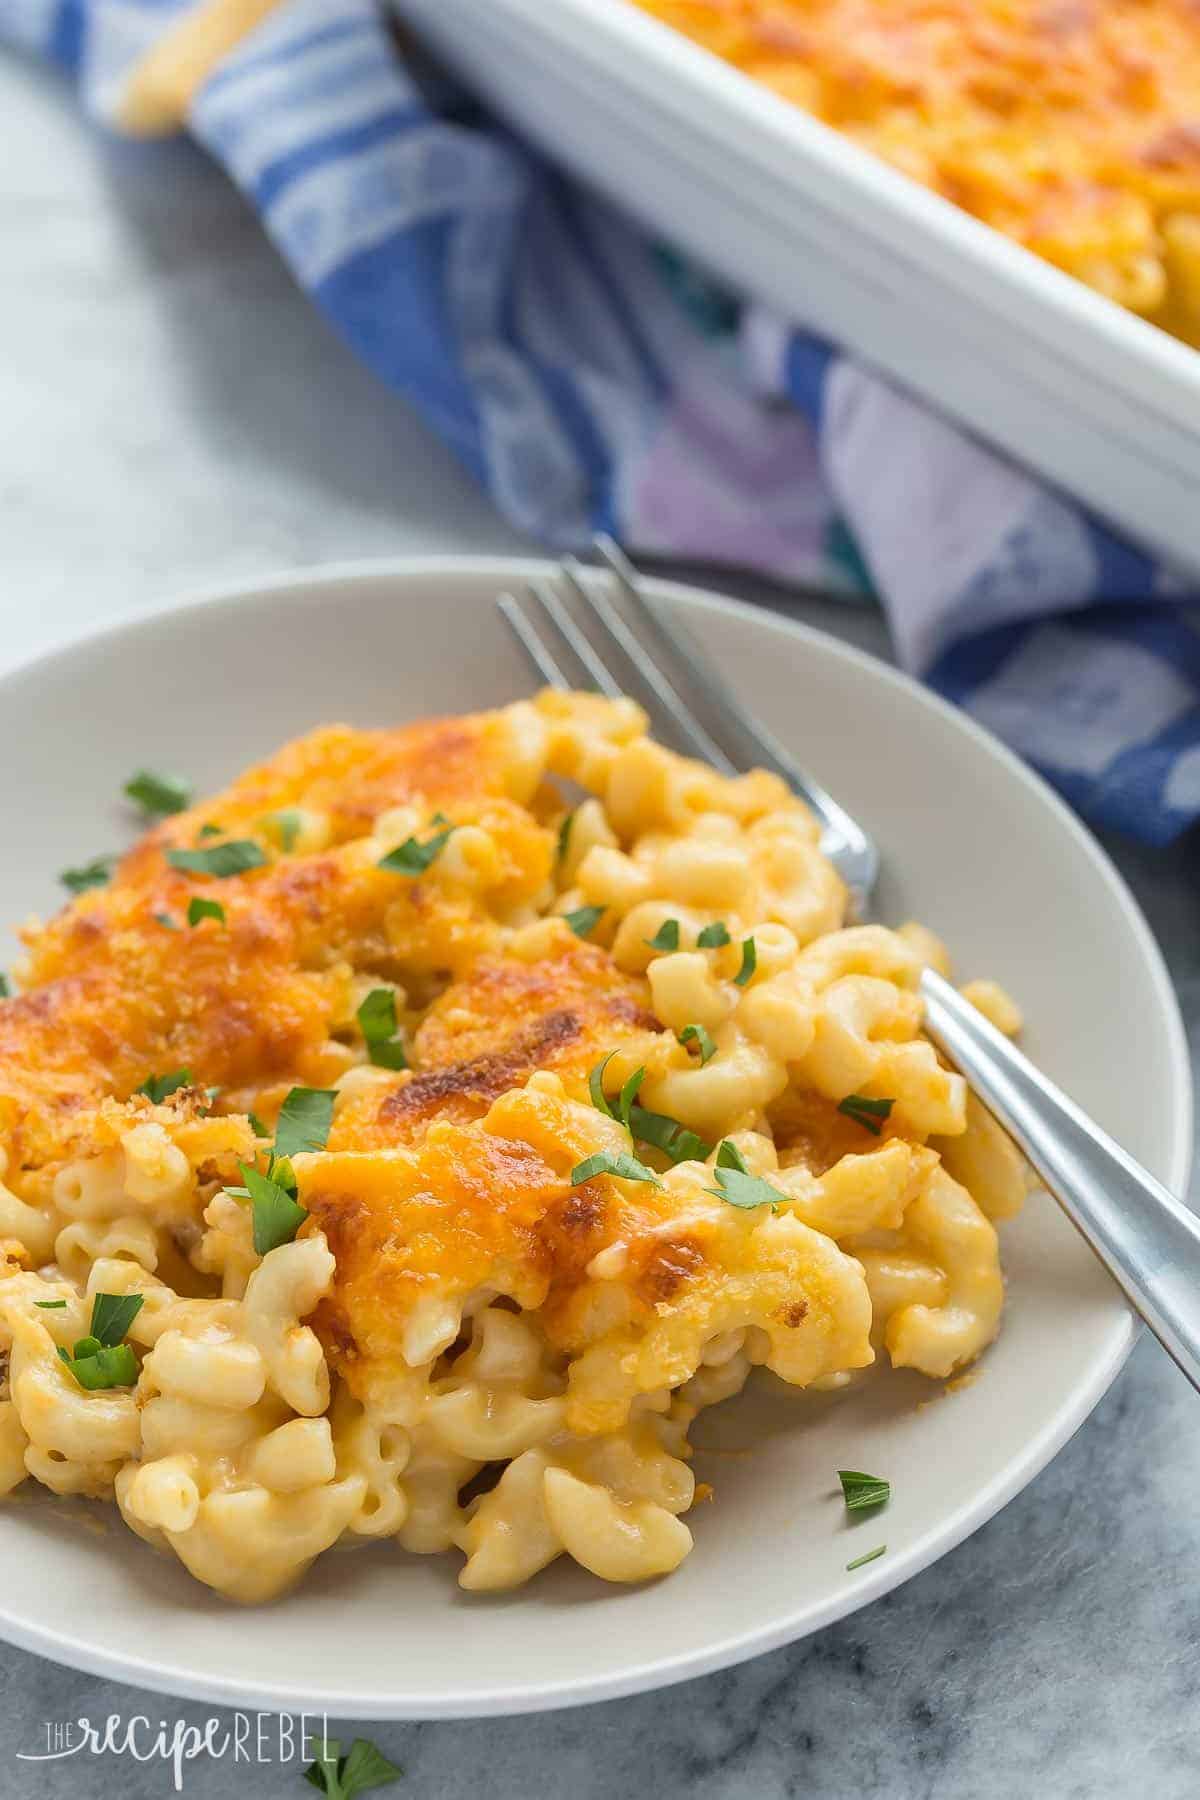 Healthier Baked Mac and Cheese